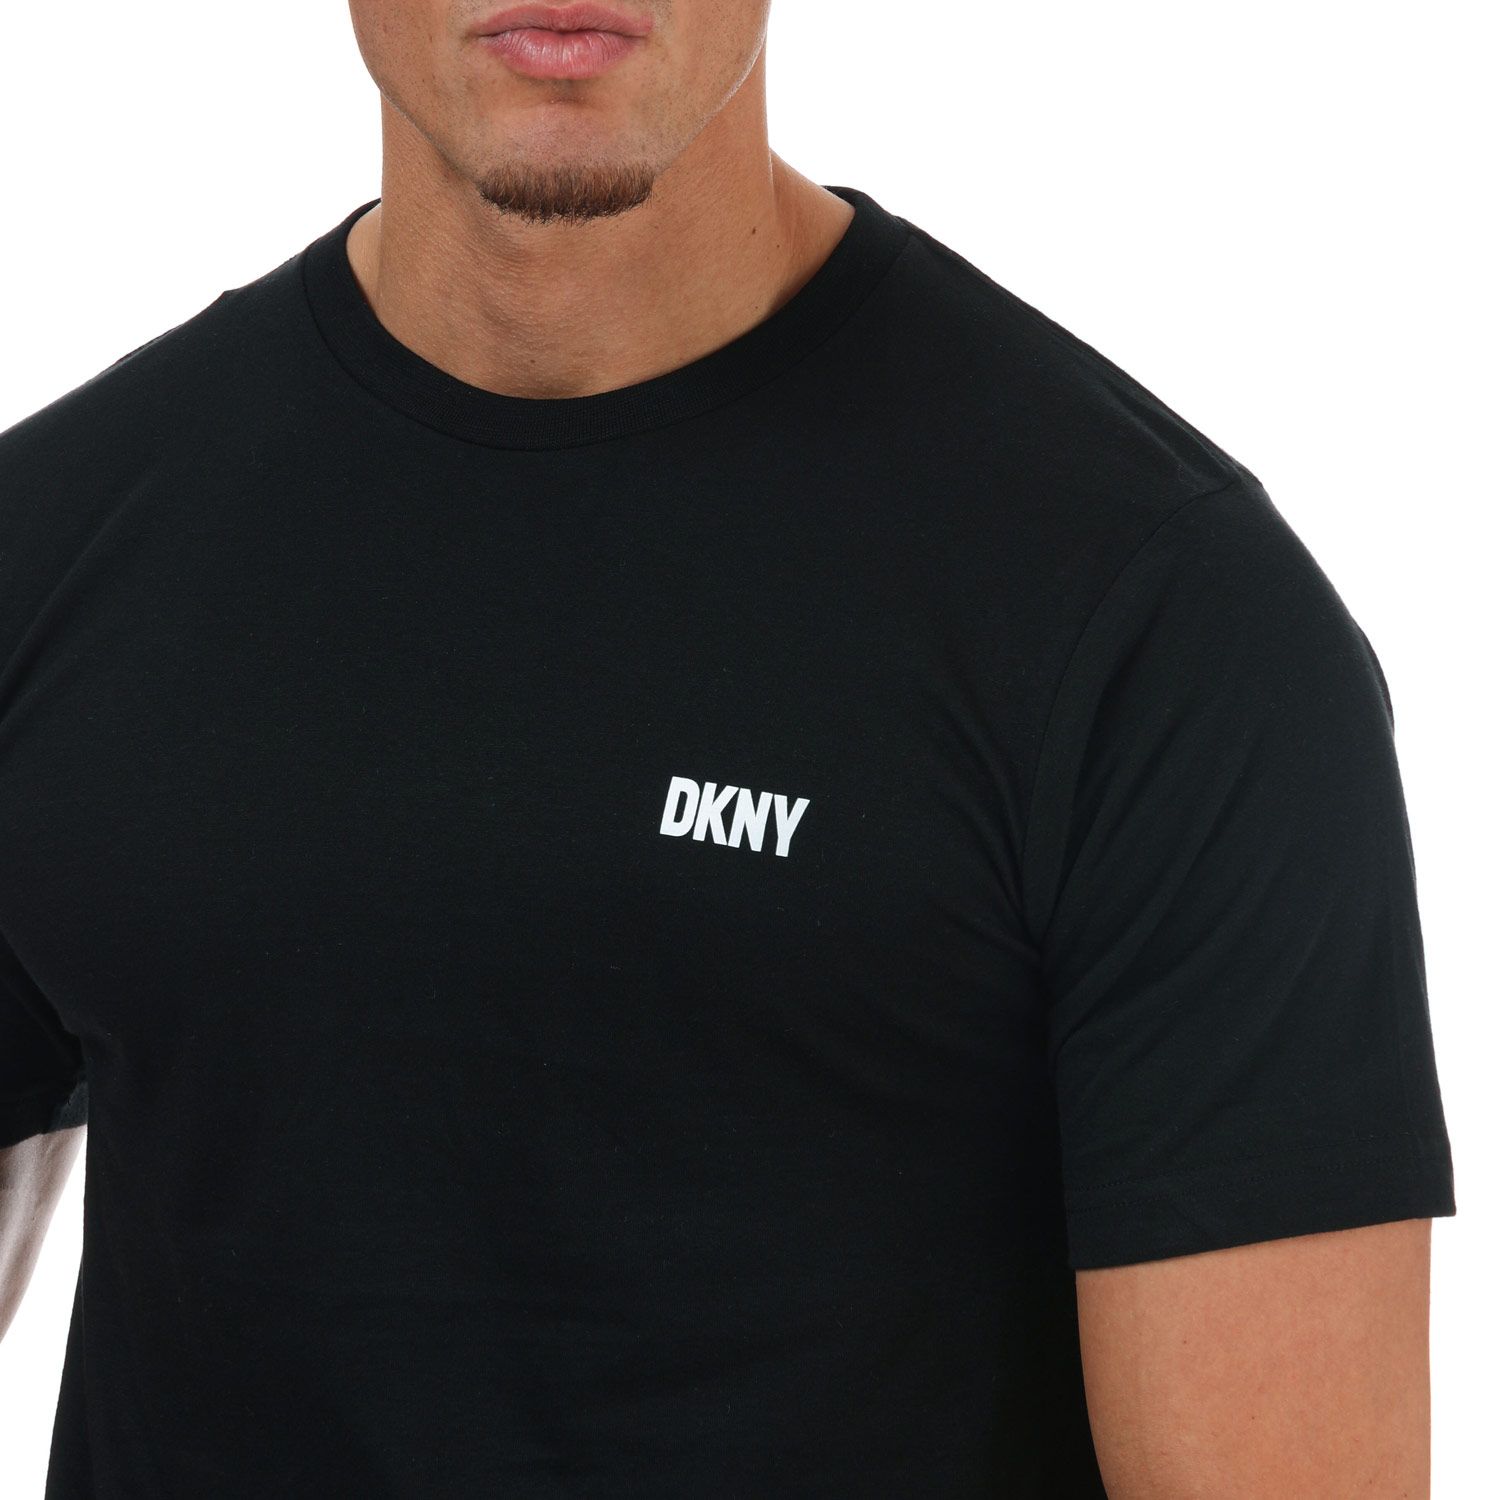 Label Black Grey - DKNY The 3 Mens White Pack T-Shirts Giants Get